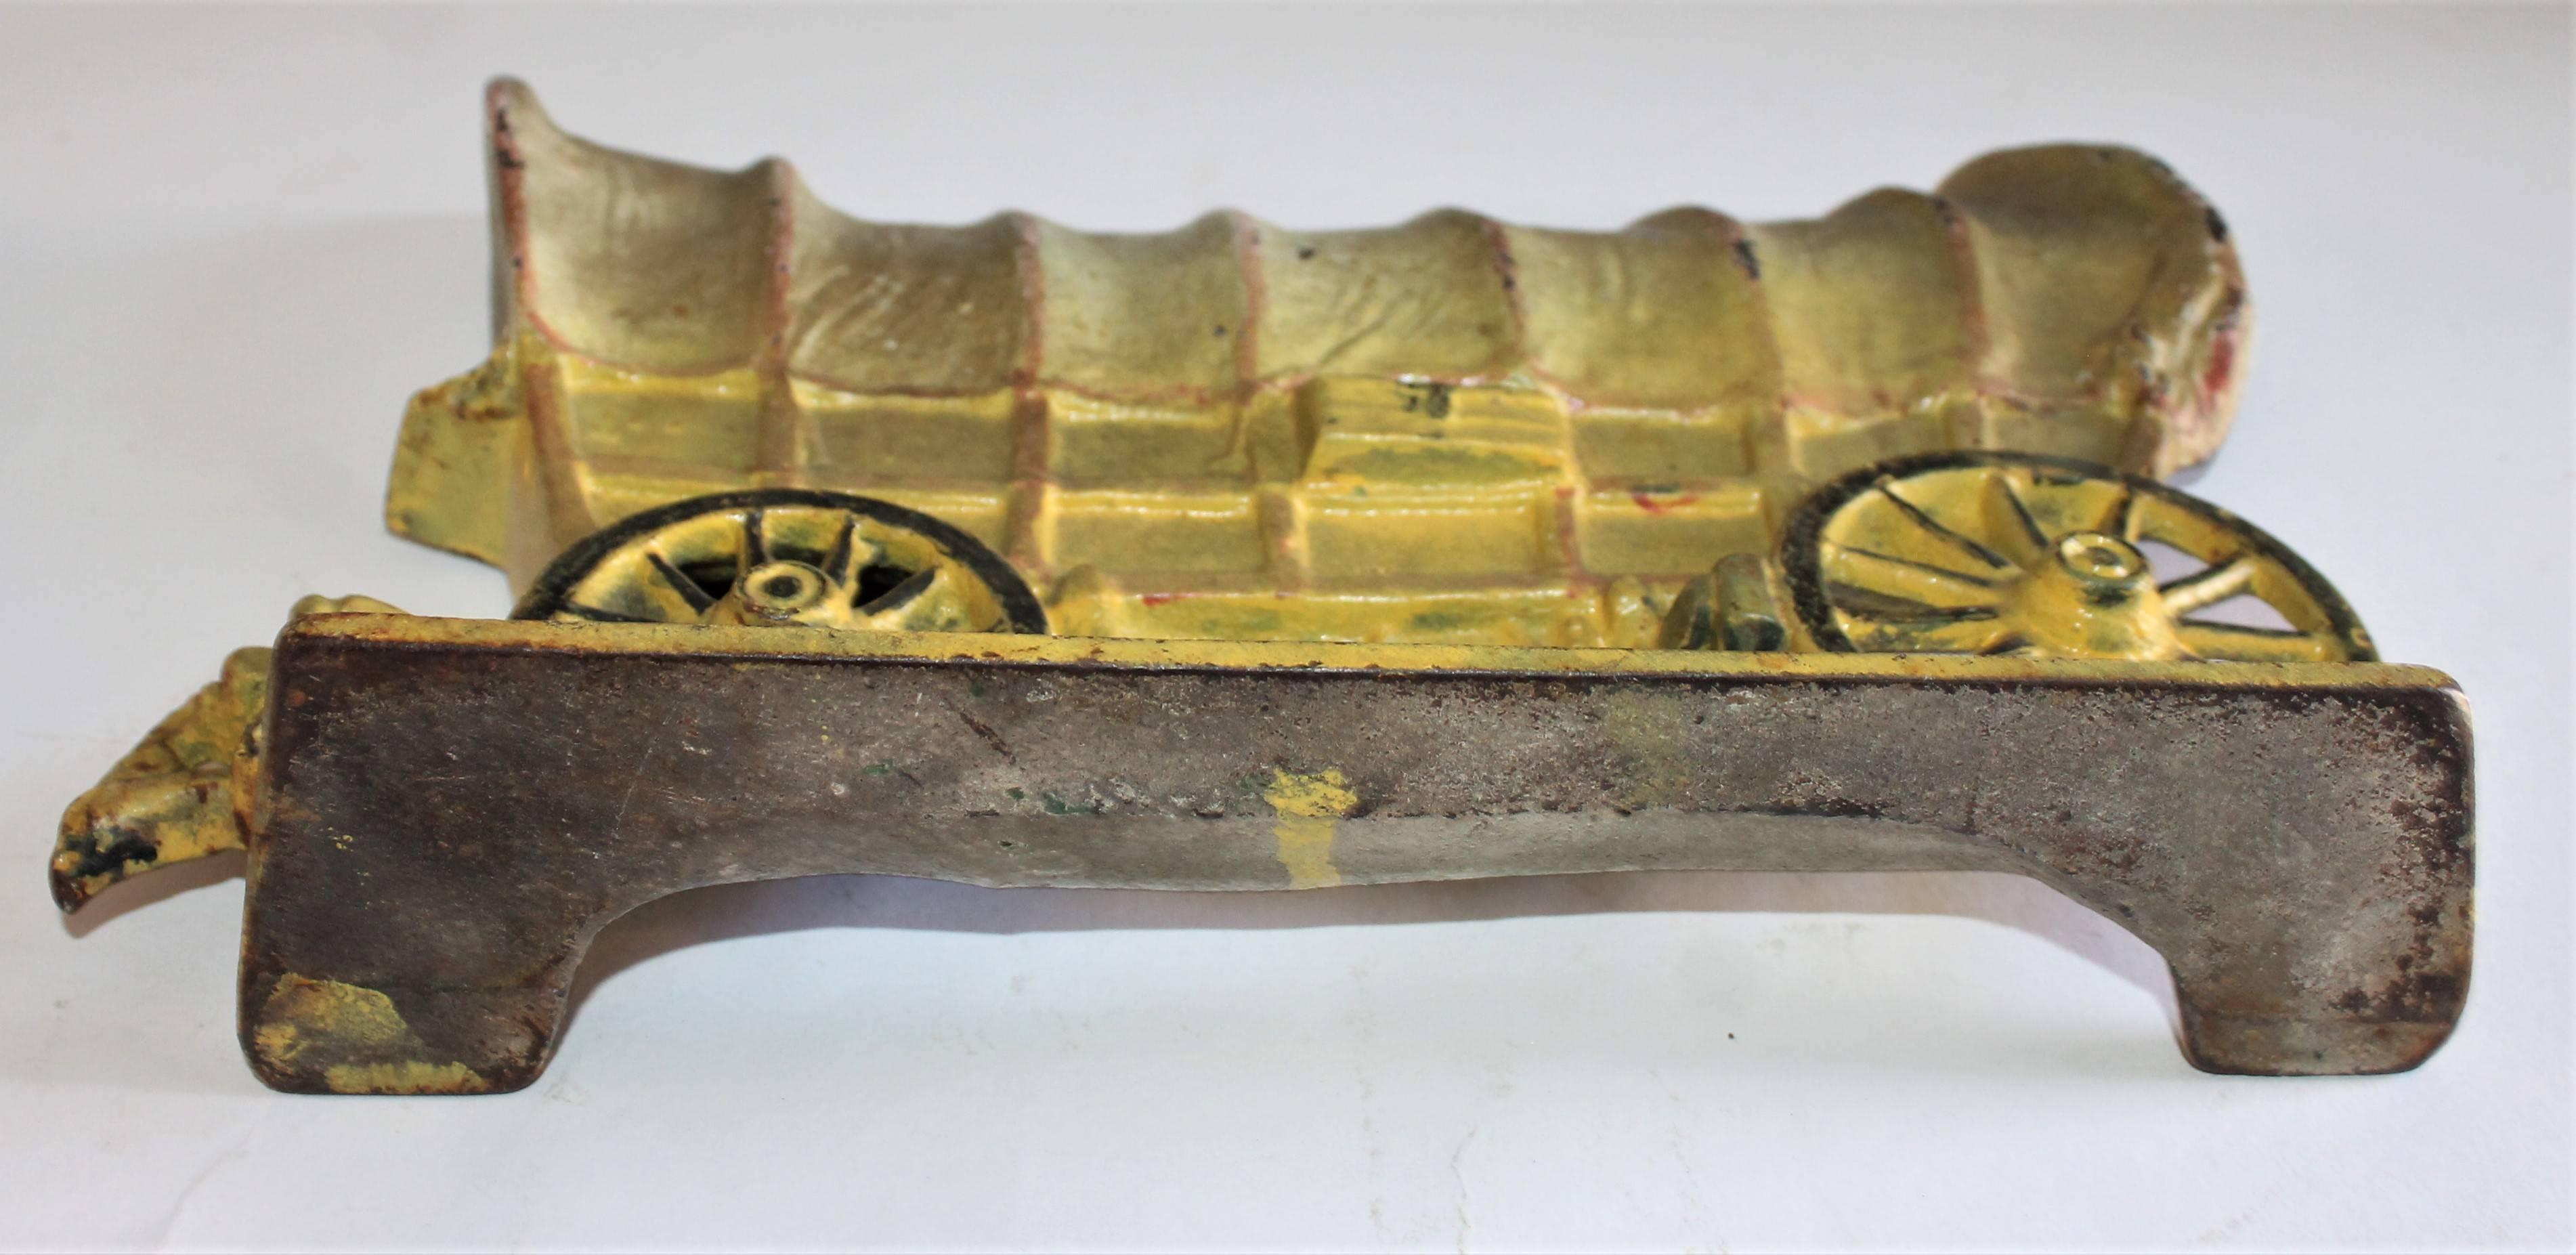 Early original painted stage coach cast iron doorstop. This fine iron Hubley doorstop and is in really great condition. It is in vibrant original surface. Wonderful patina.